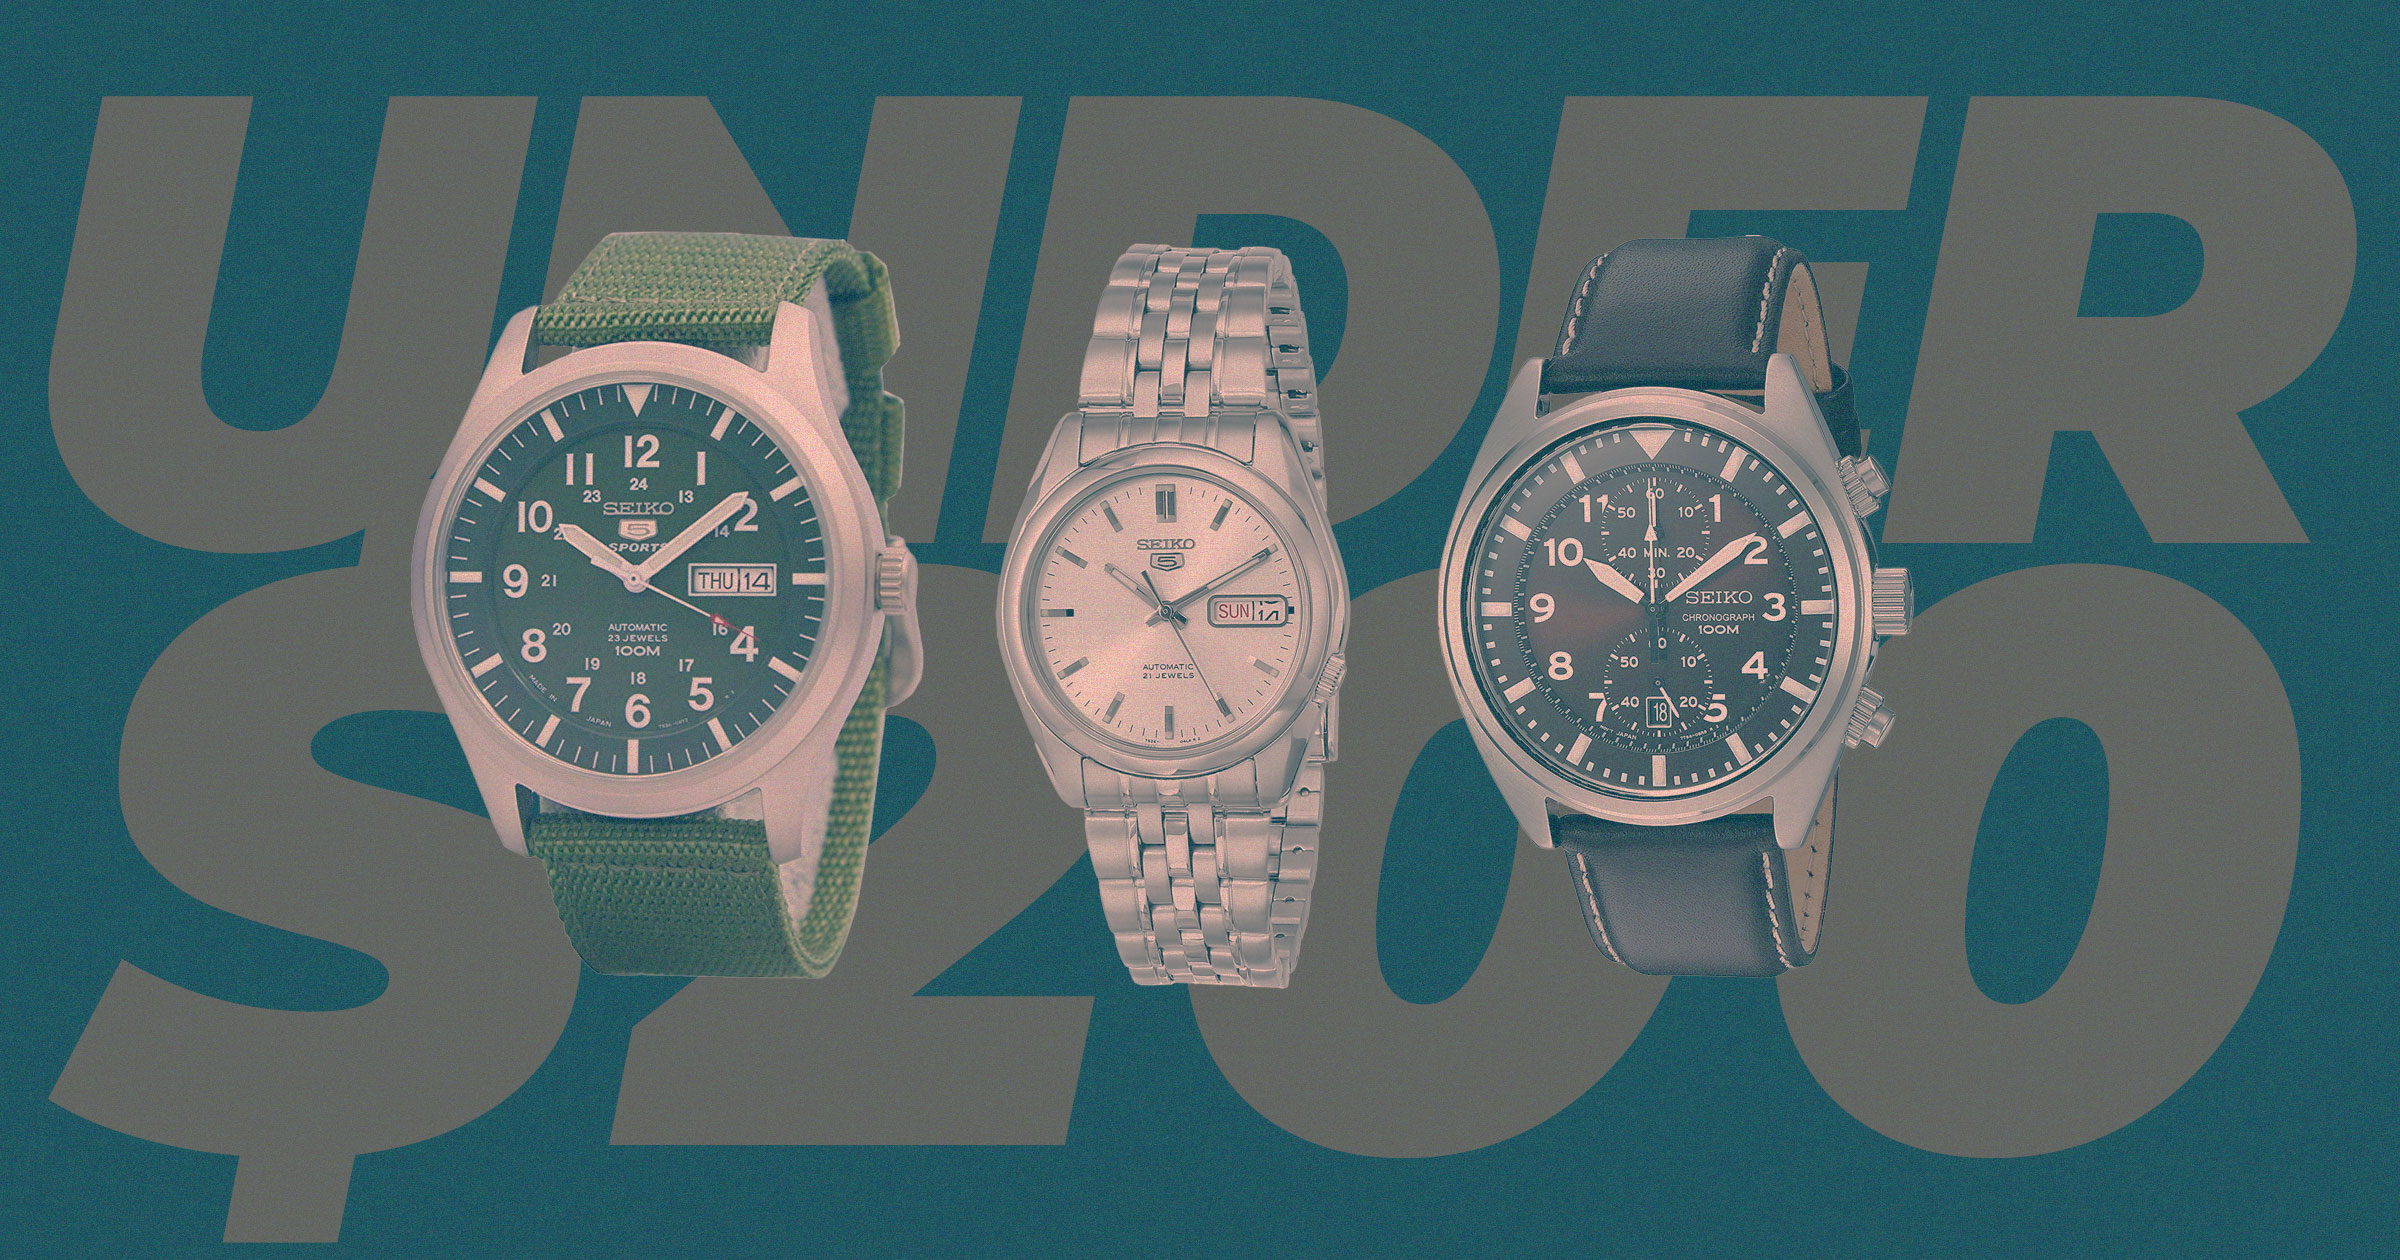 Twice As Nice: Here Are 15 Of The Best Seiko Watches Under $200